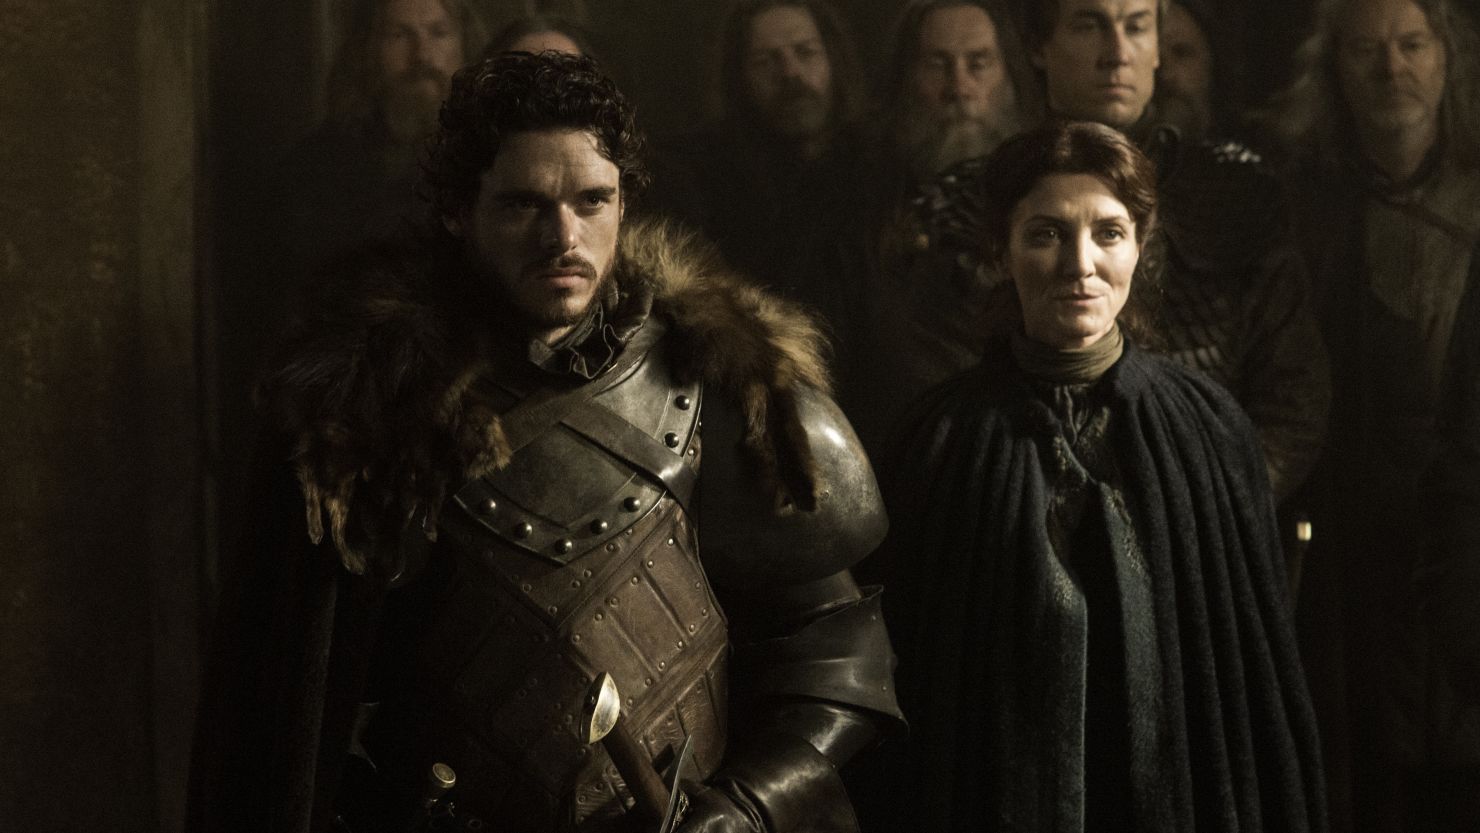 HBO's hit show "Game of Thrones" might have some lessons for the William and Kate's new baby.